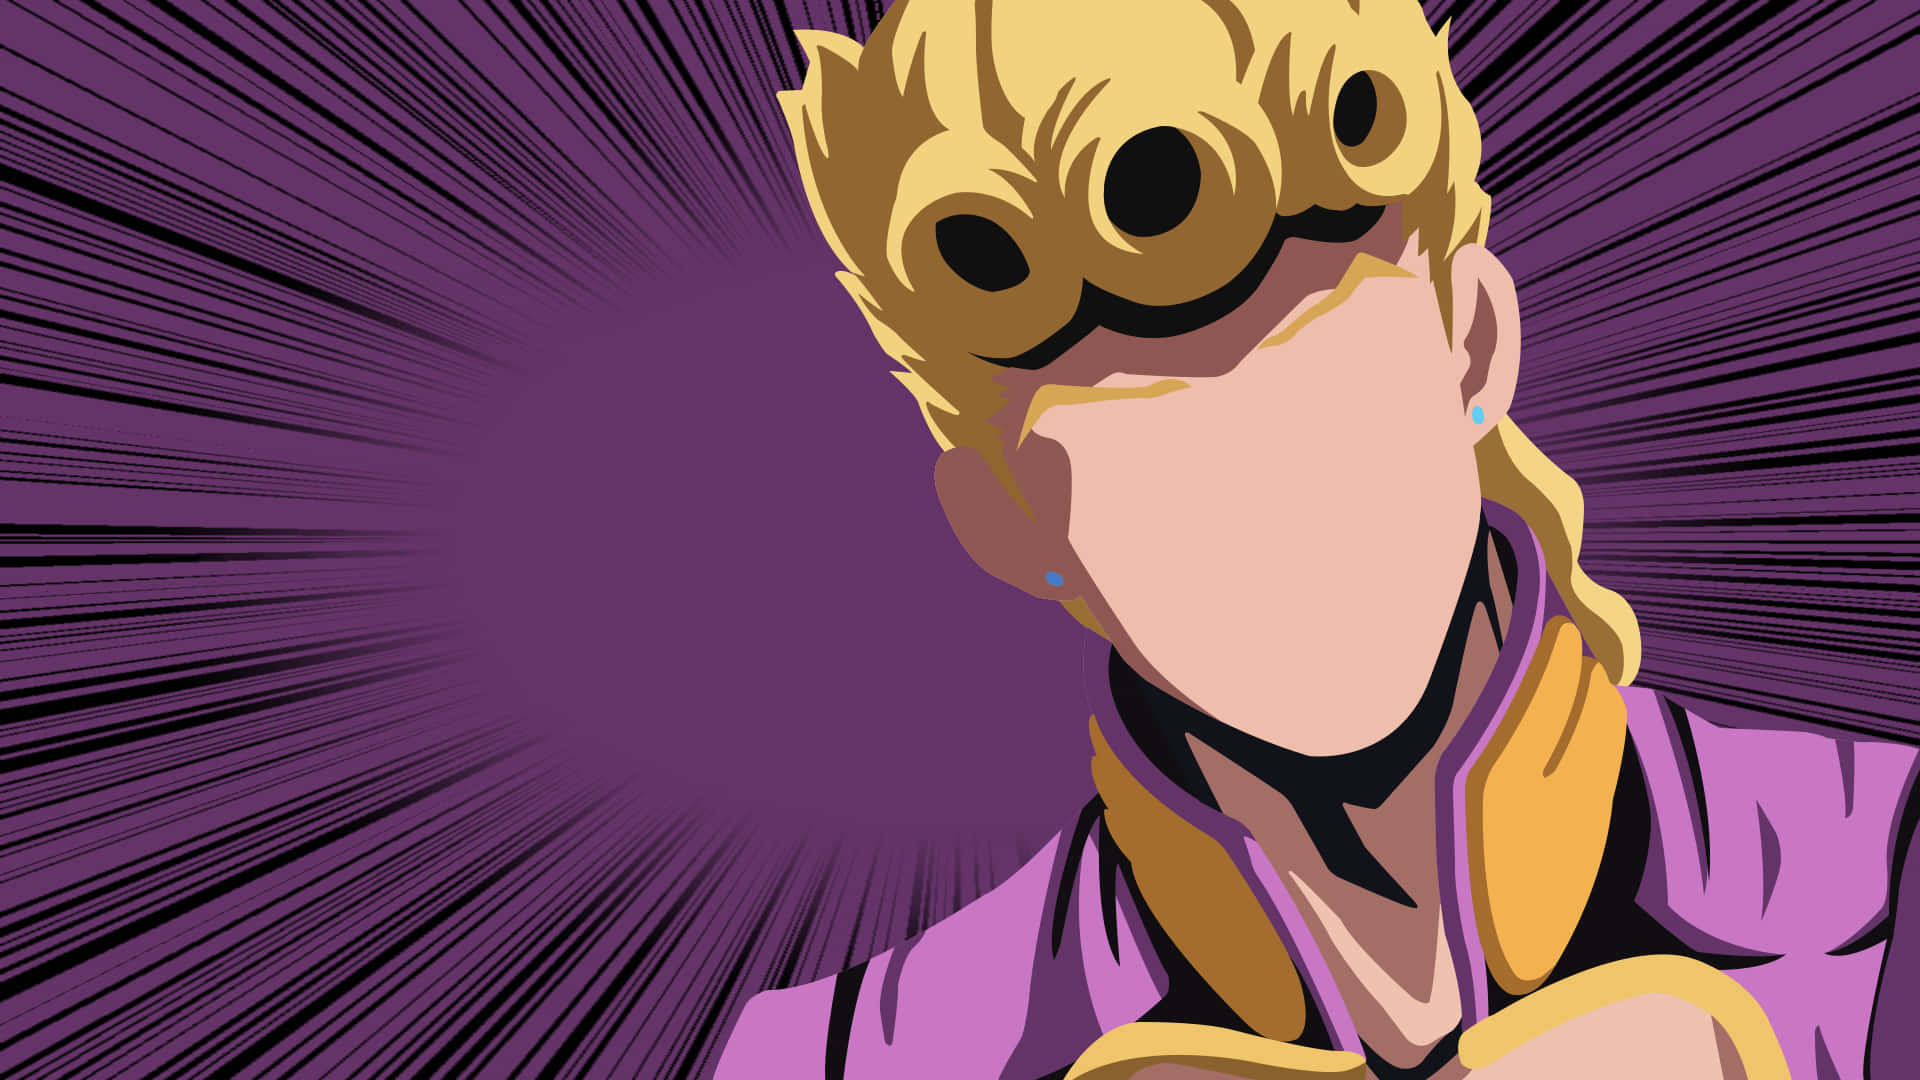 Jojo and Dio face-off in an epic moment Wallpaper